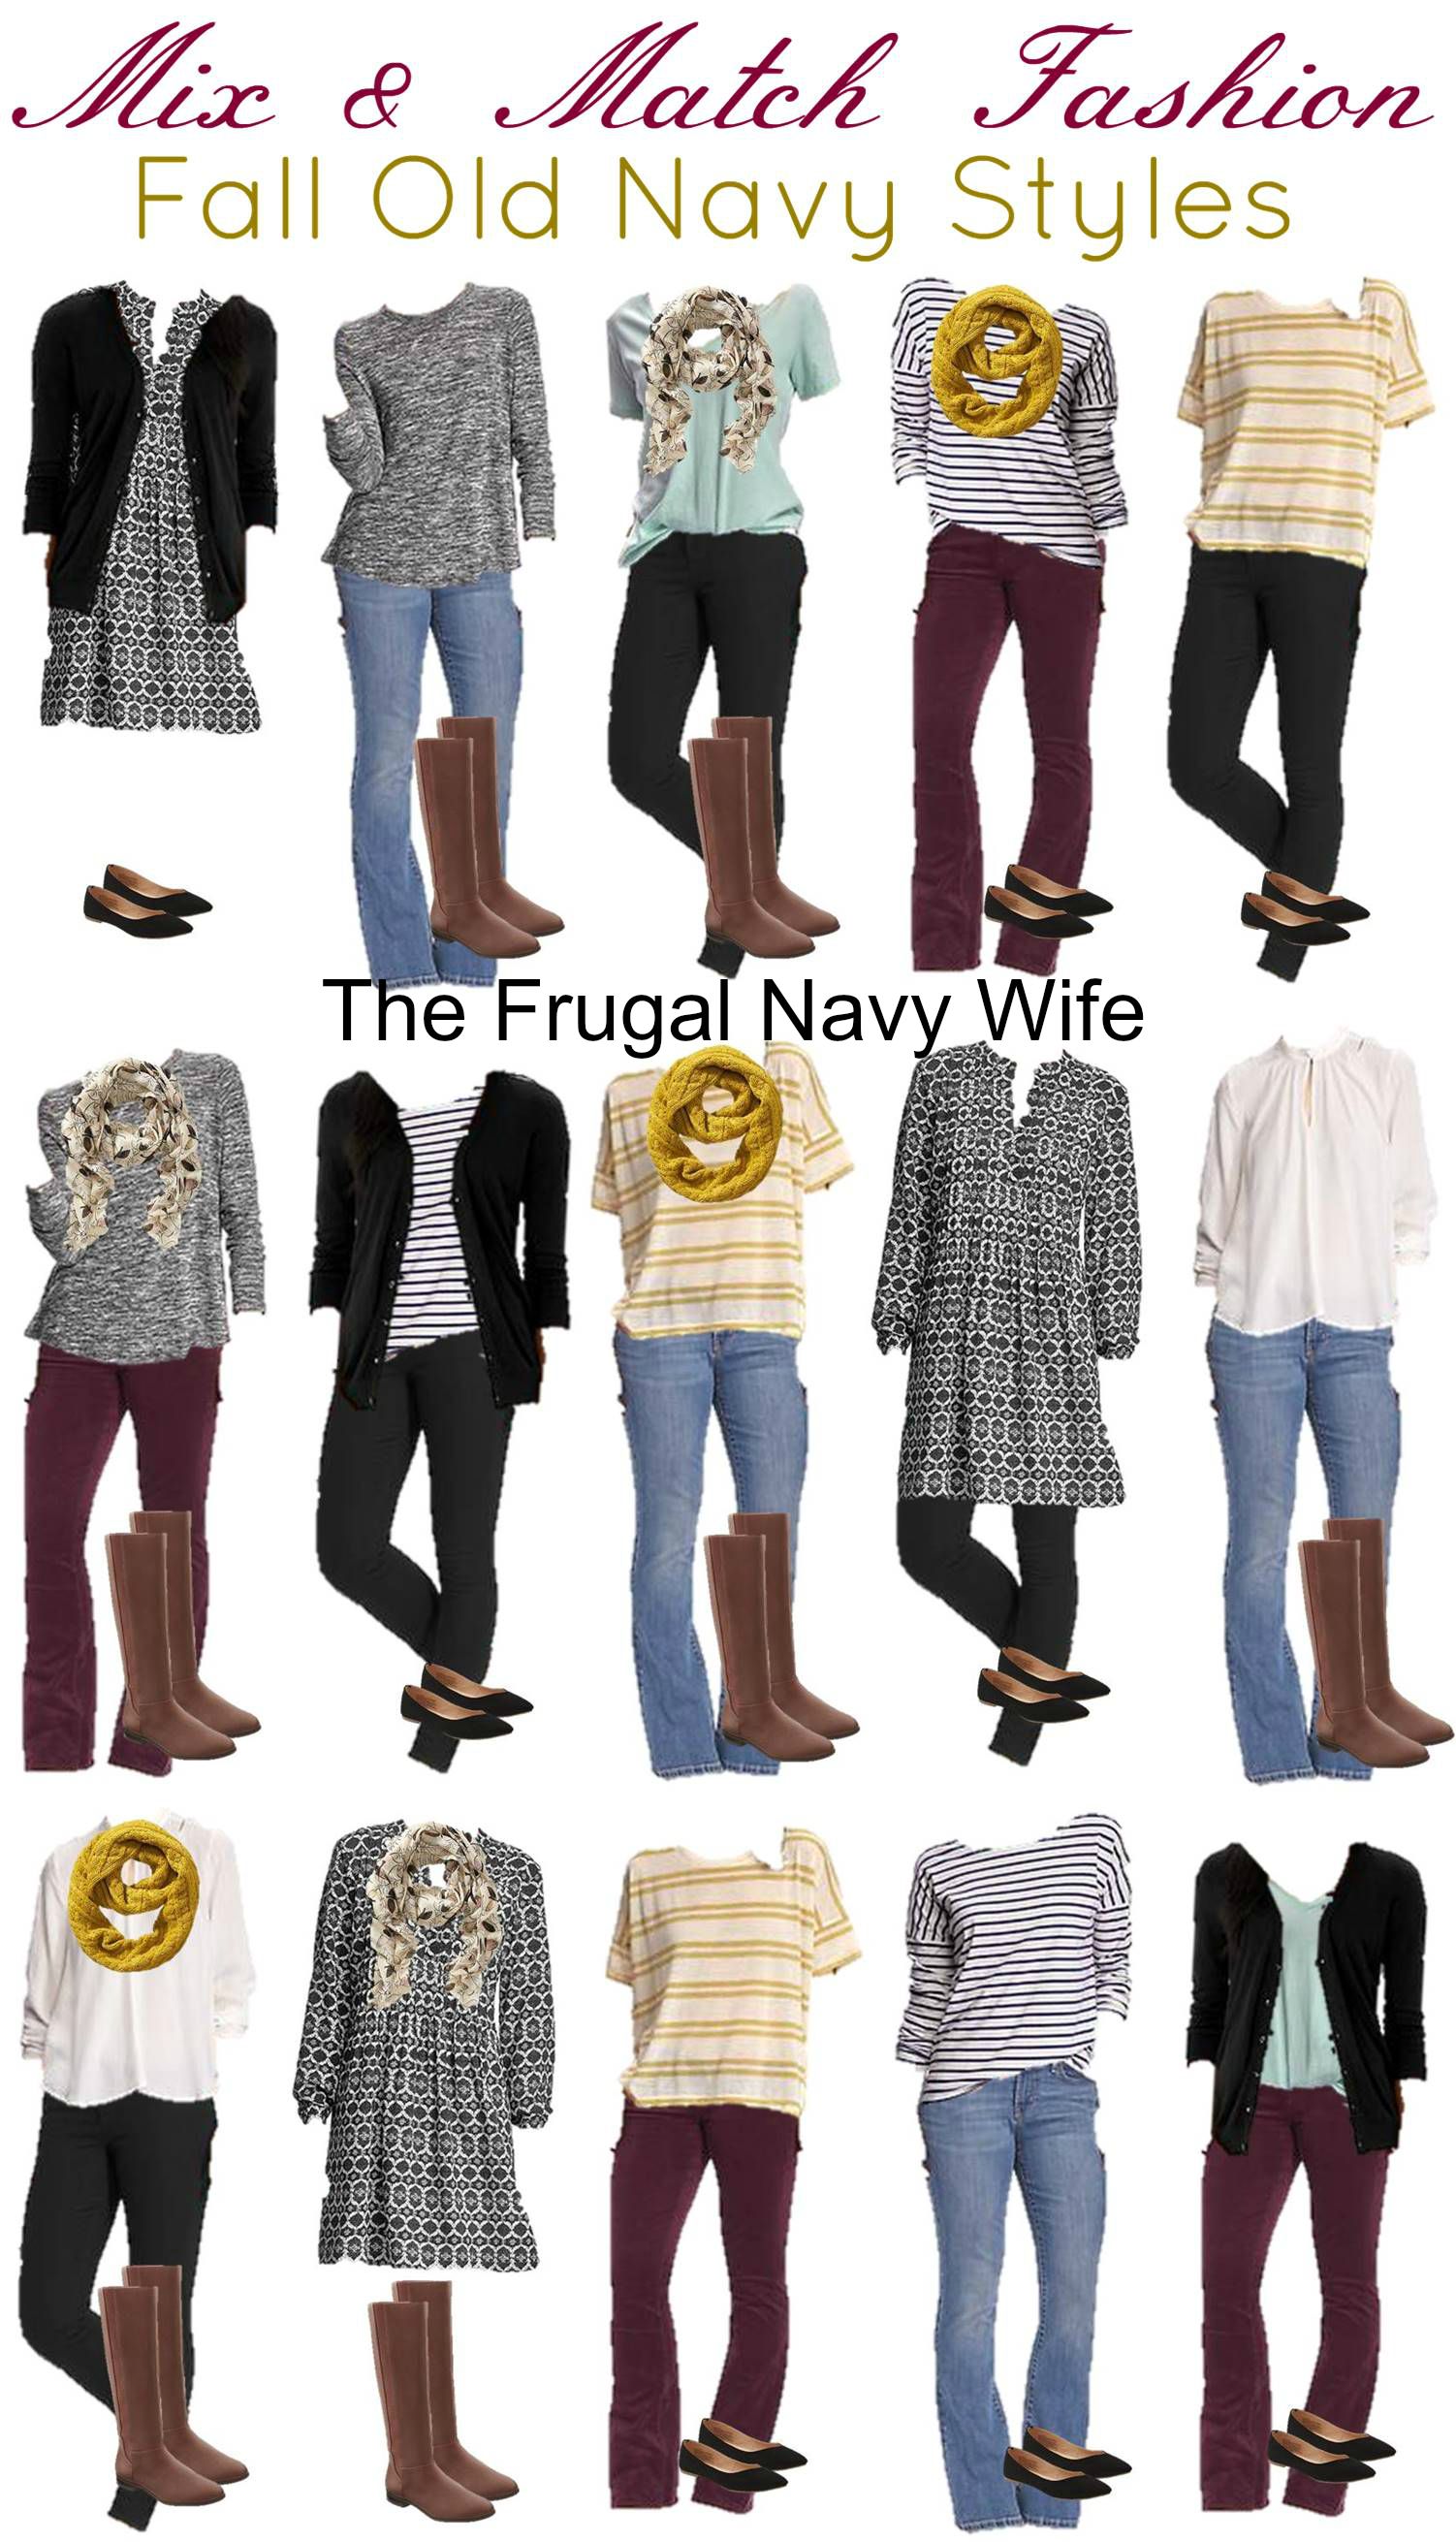 Old Navy Mix and Match Fall Outfits - The Frugal Navy Wife